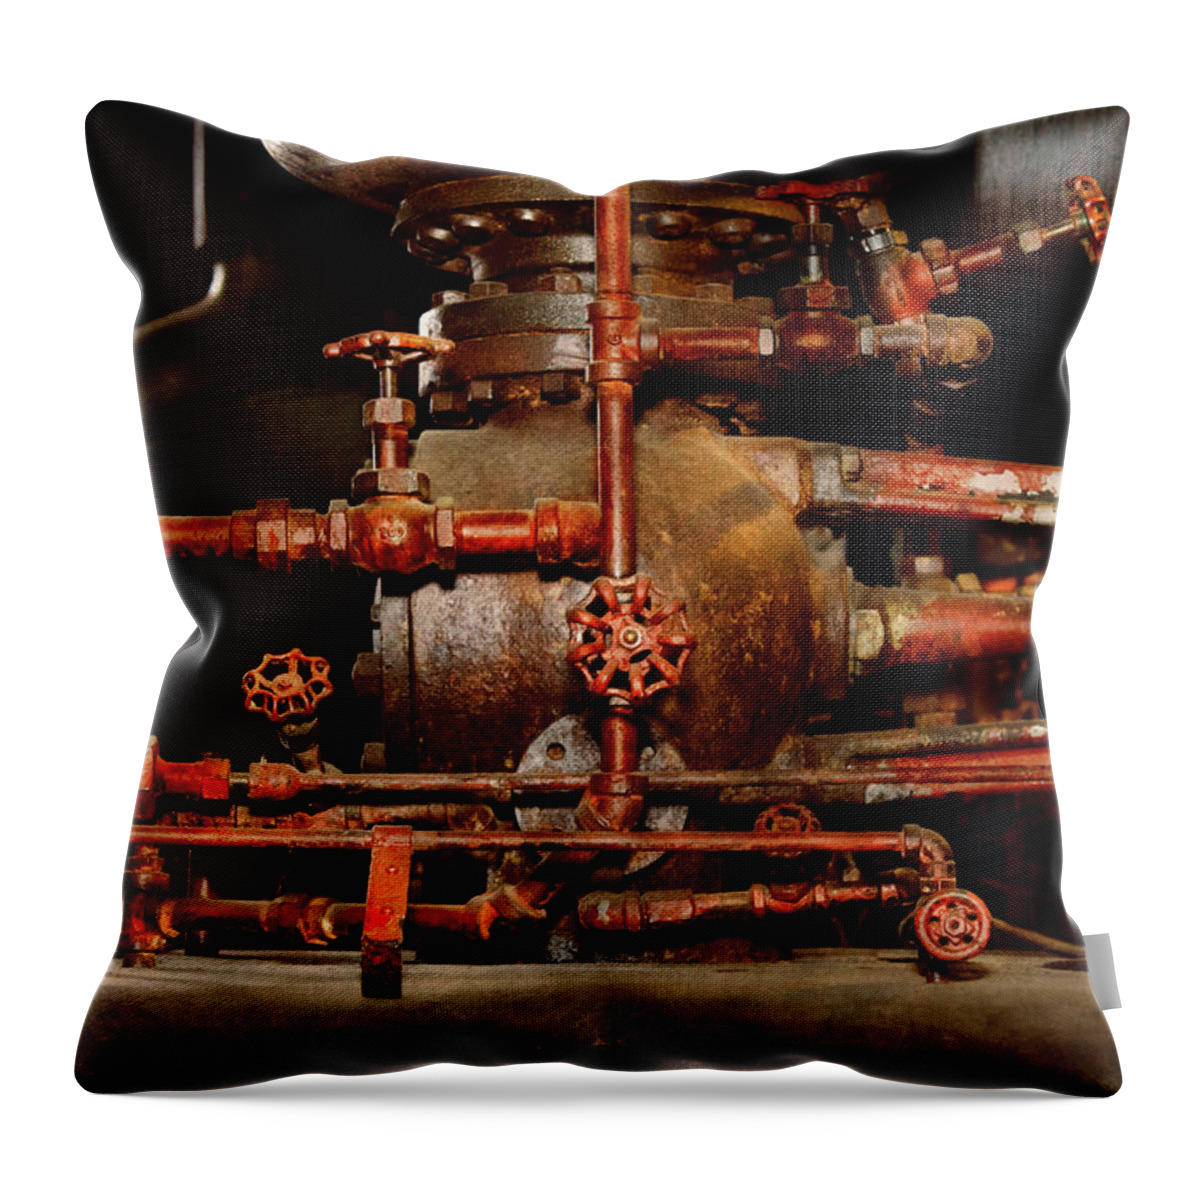 Steampunk Art Throw Pillow featuring the photograph Steampunk - Pipe dreams by Mike Savad